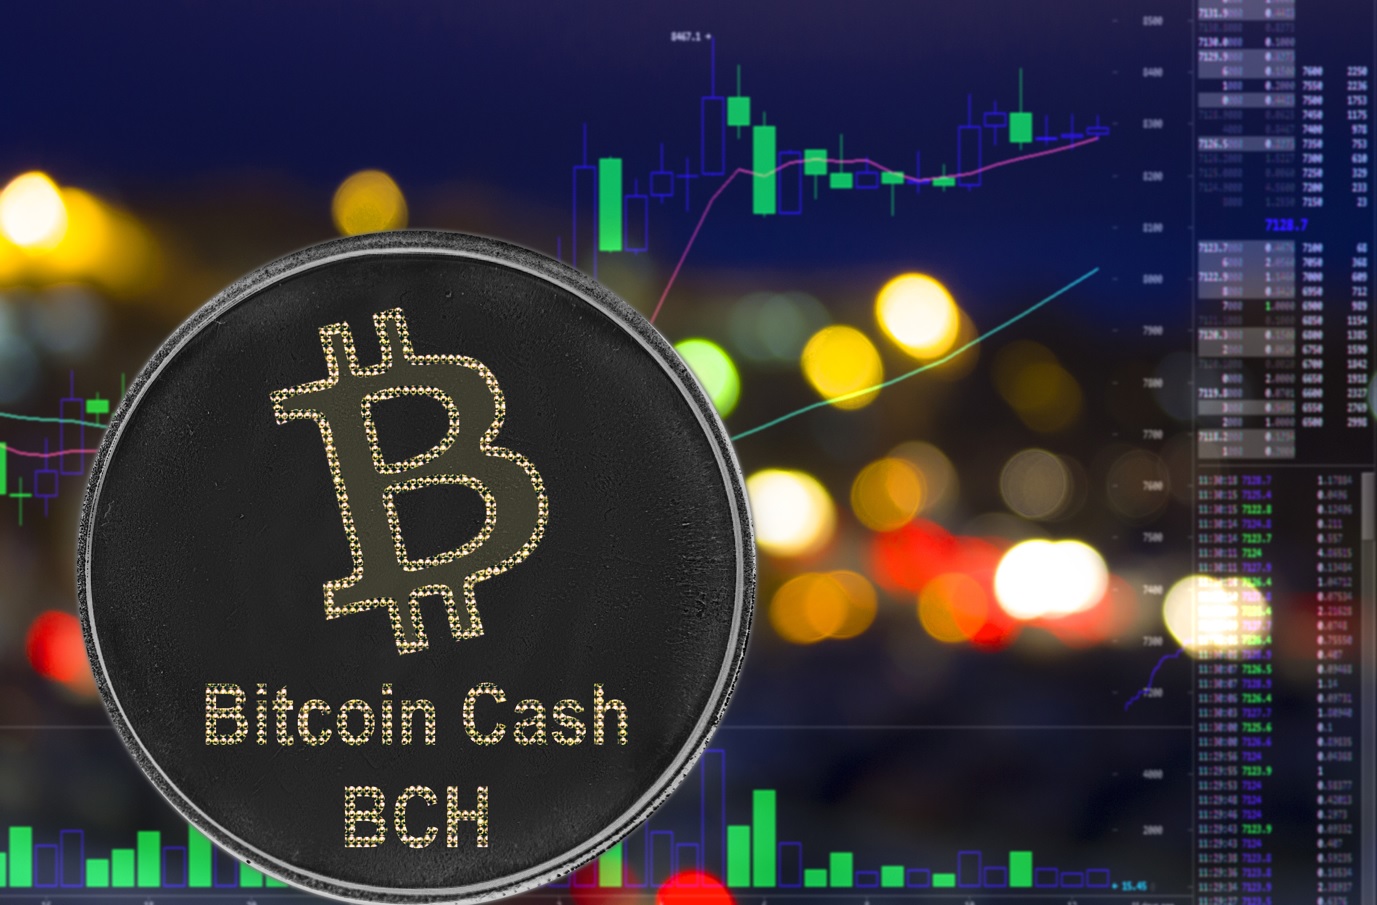  cash bitcoin soon 500 could test journal 